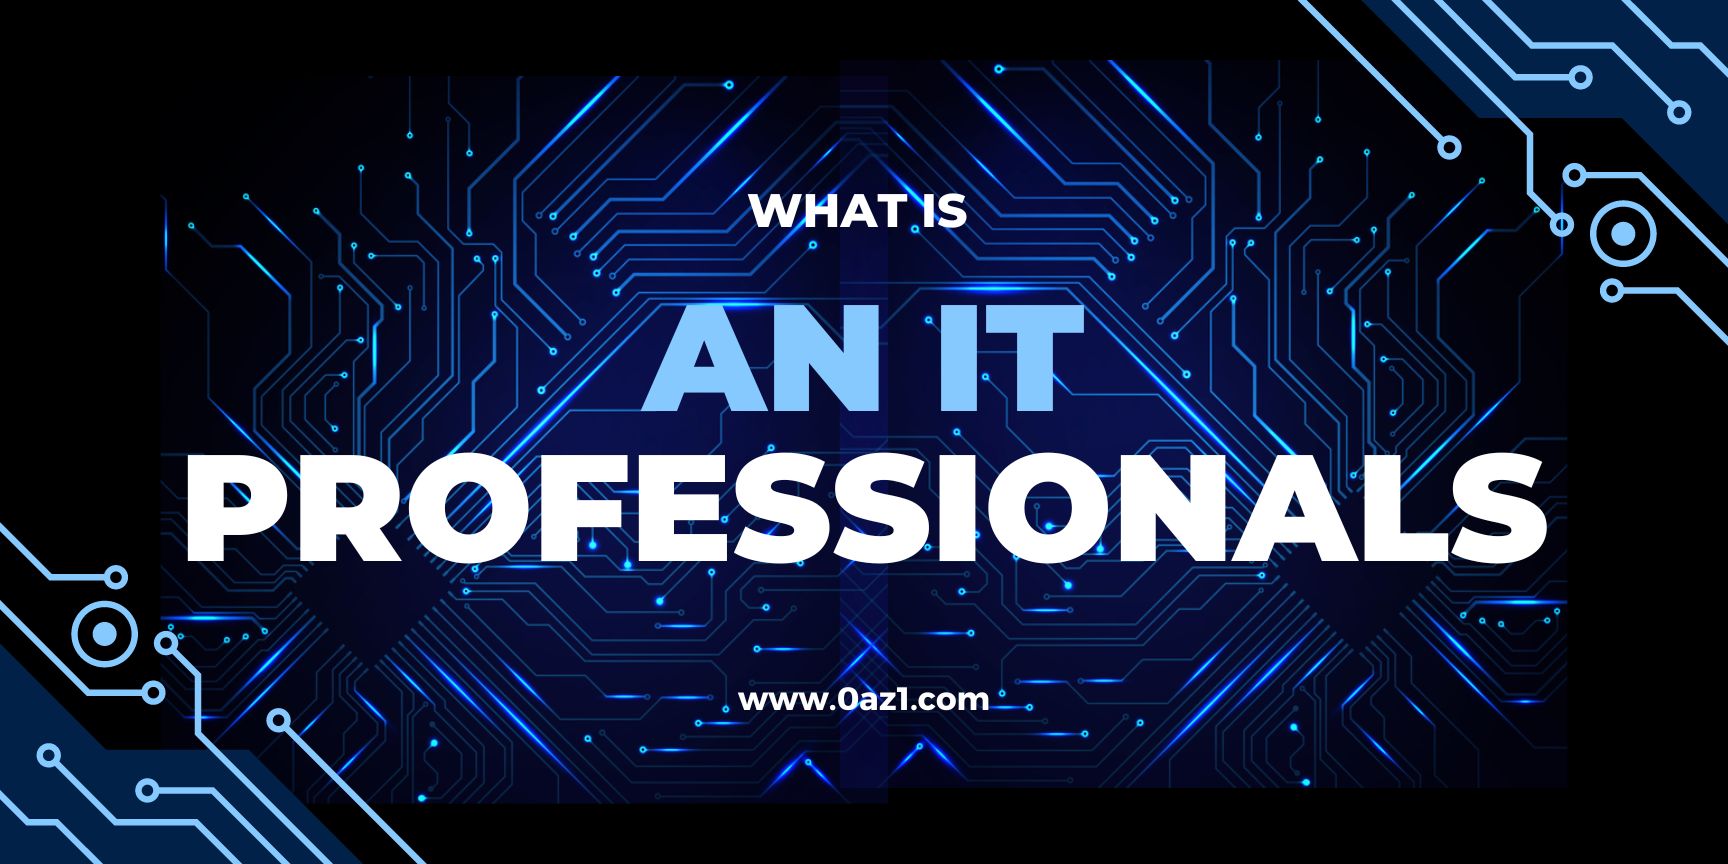 What Is An It Professionals